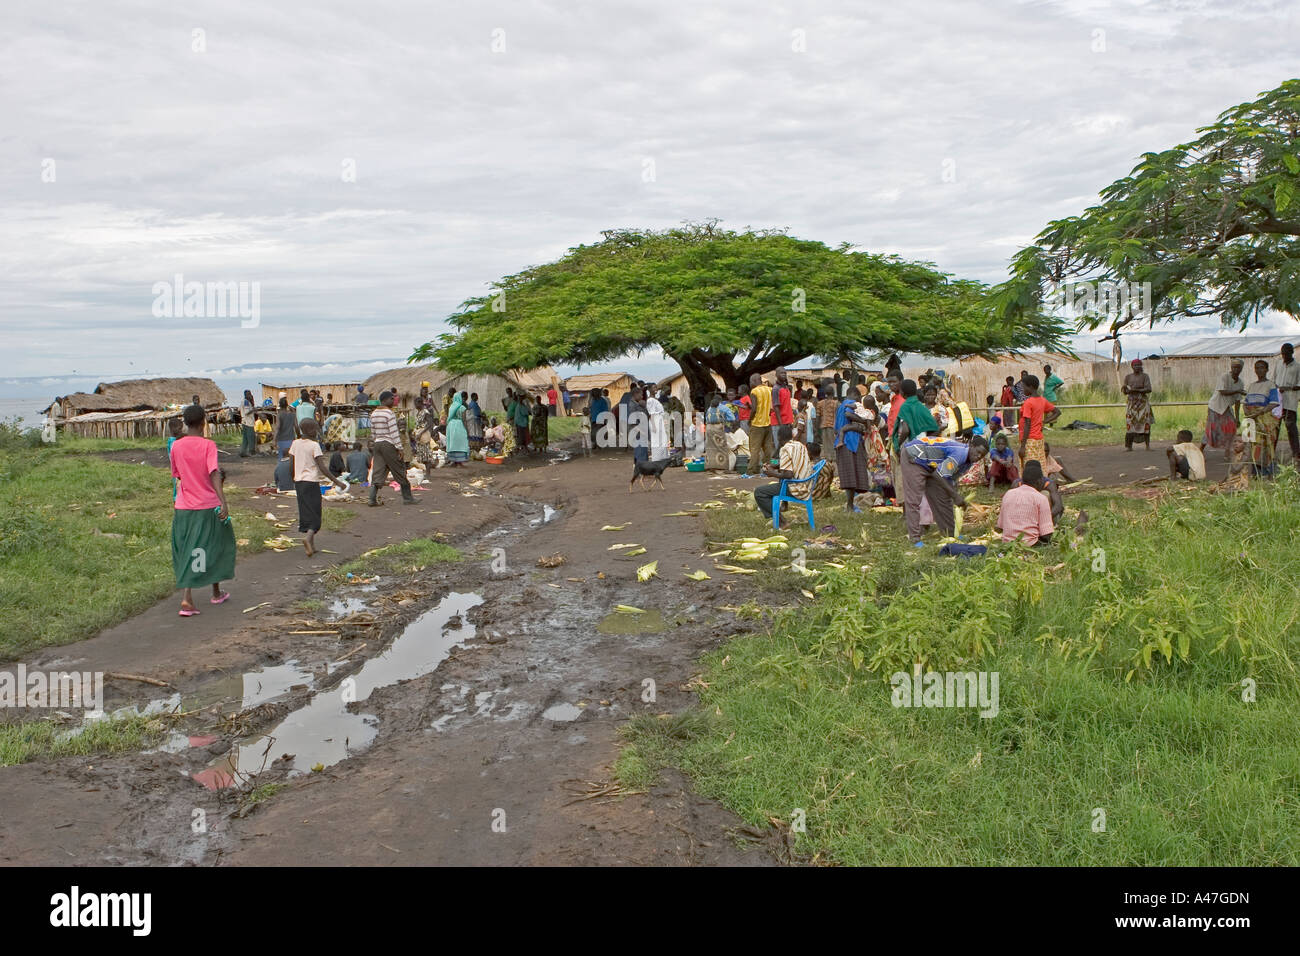 Local people coming from and going to in market of remote fishing village, Lake Albert, Northern Uganda, East Africa Stock Photo